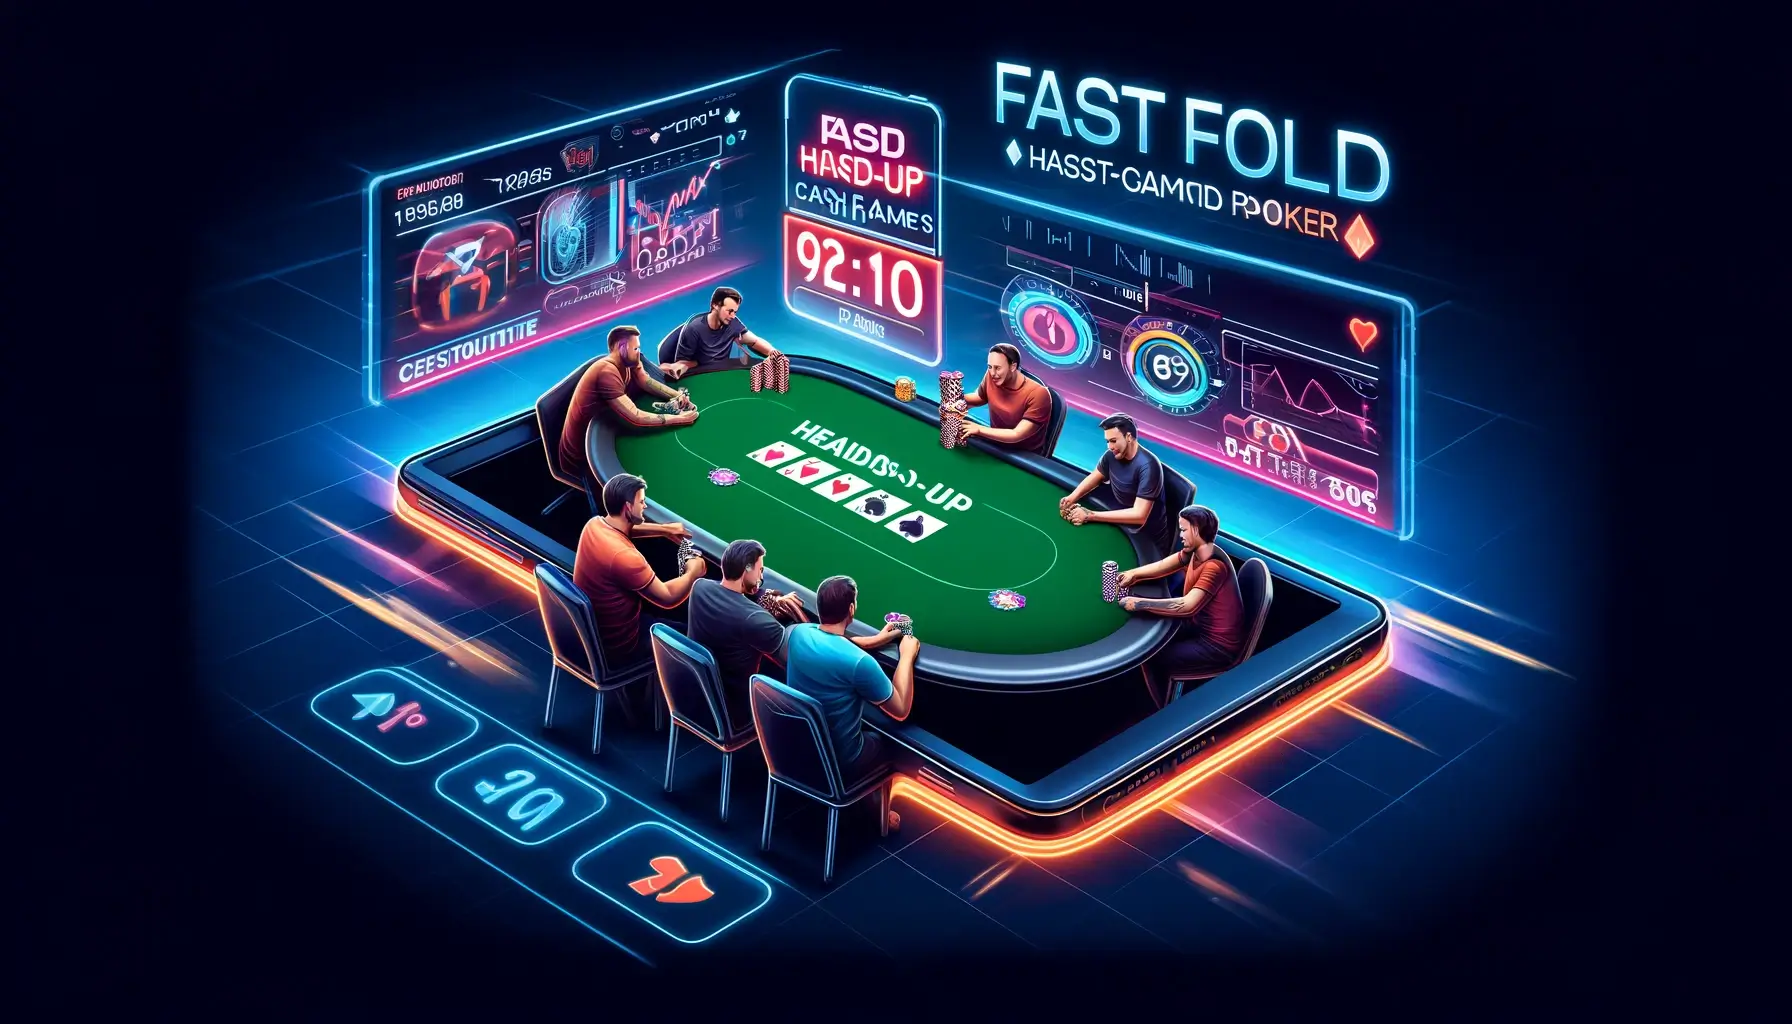 Partypoker Transforms Heads-Up Cash Game Tables into Fast-Fold Format